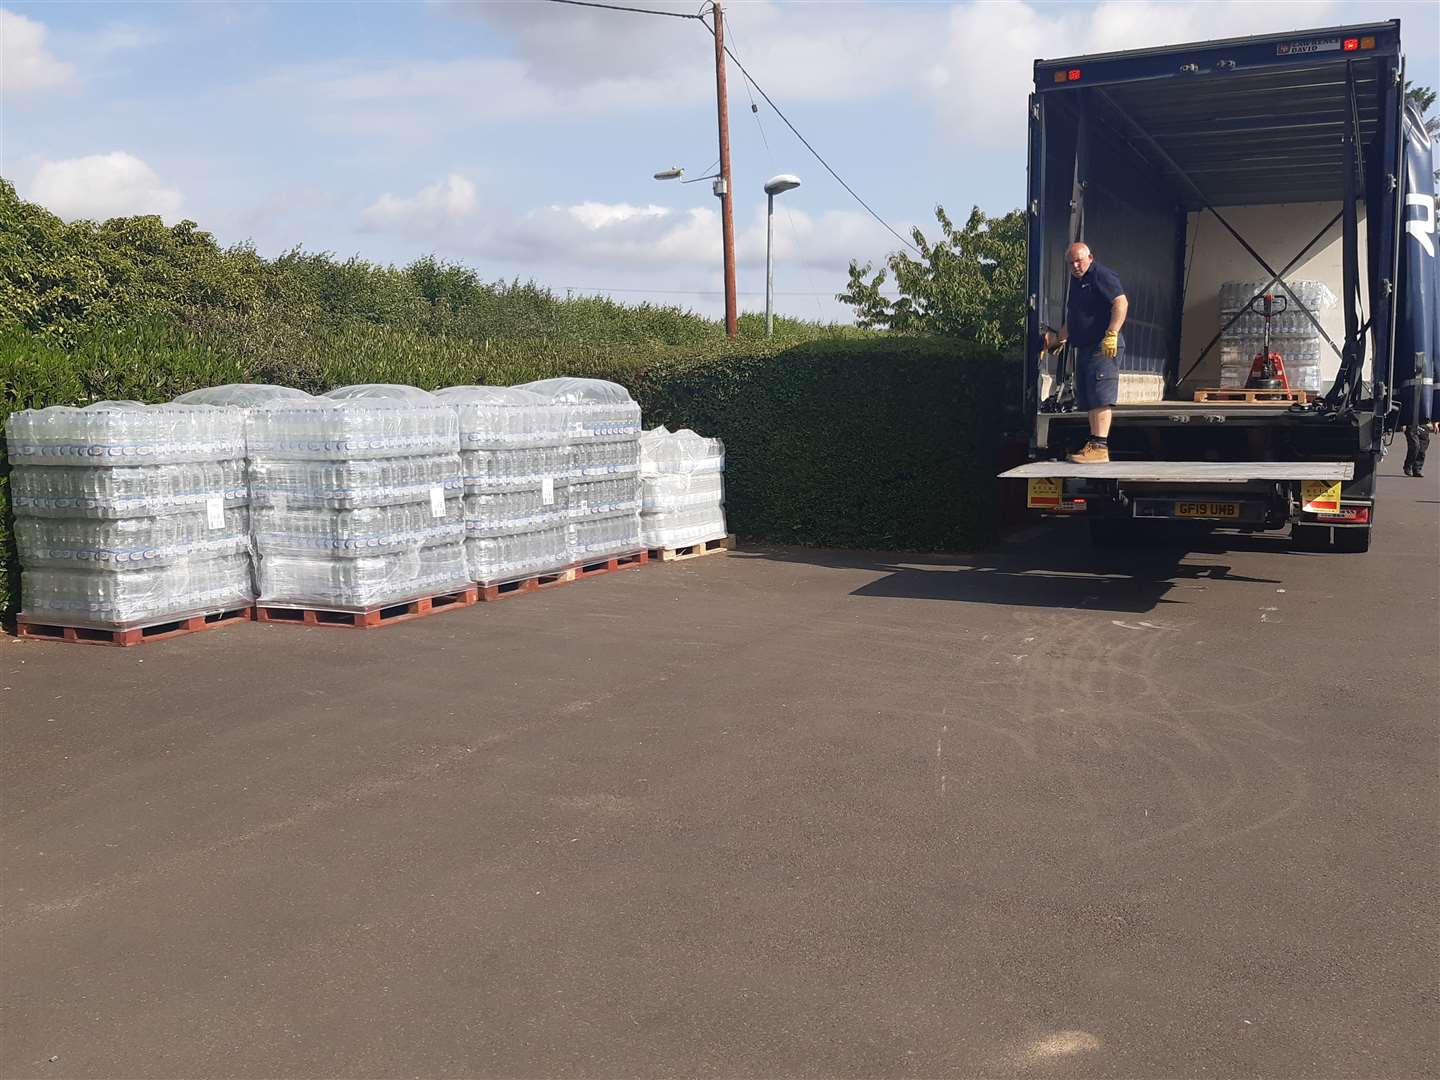 Pallets of water wait to be distributed in East Peckham